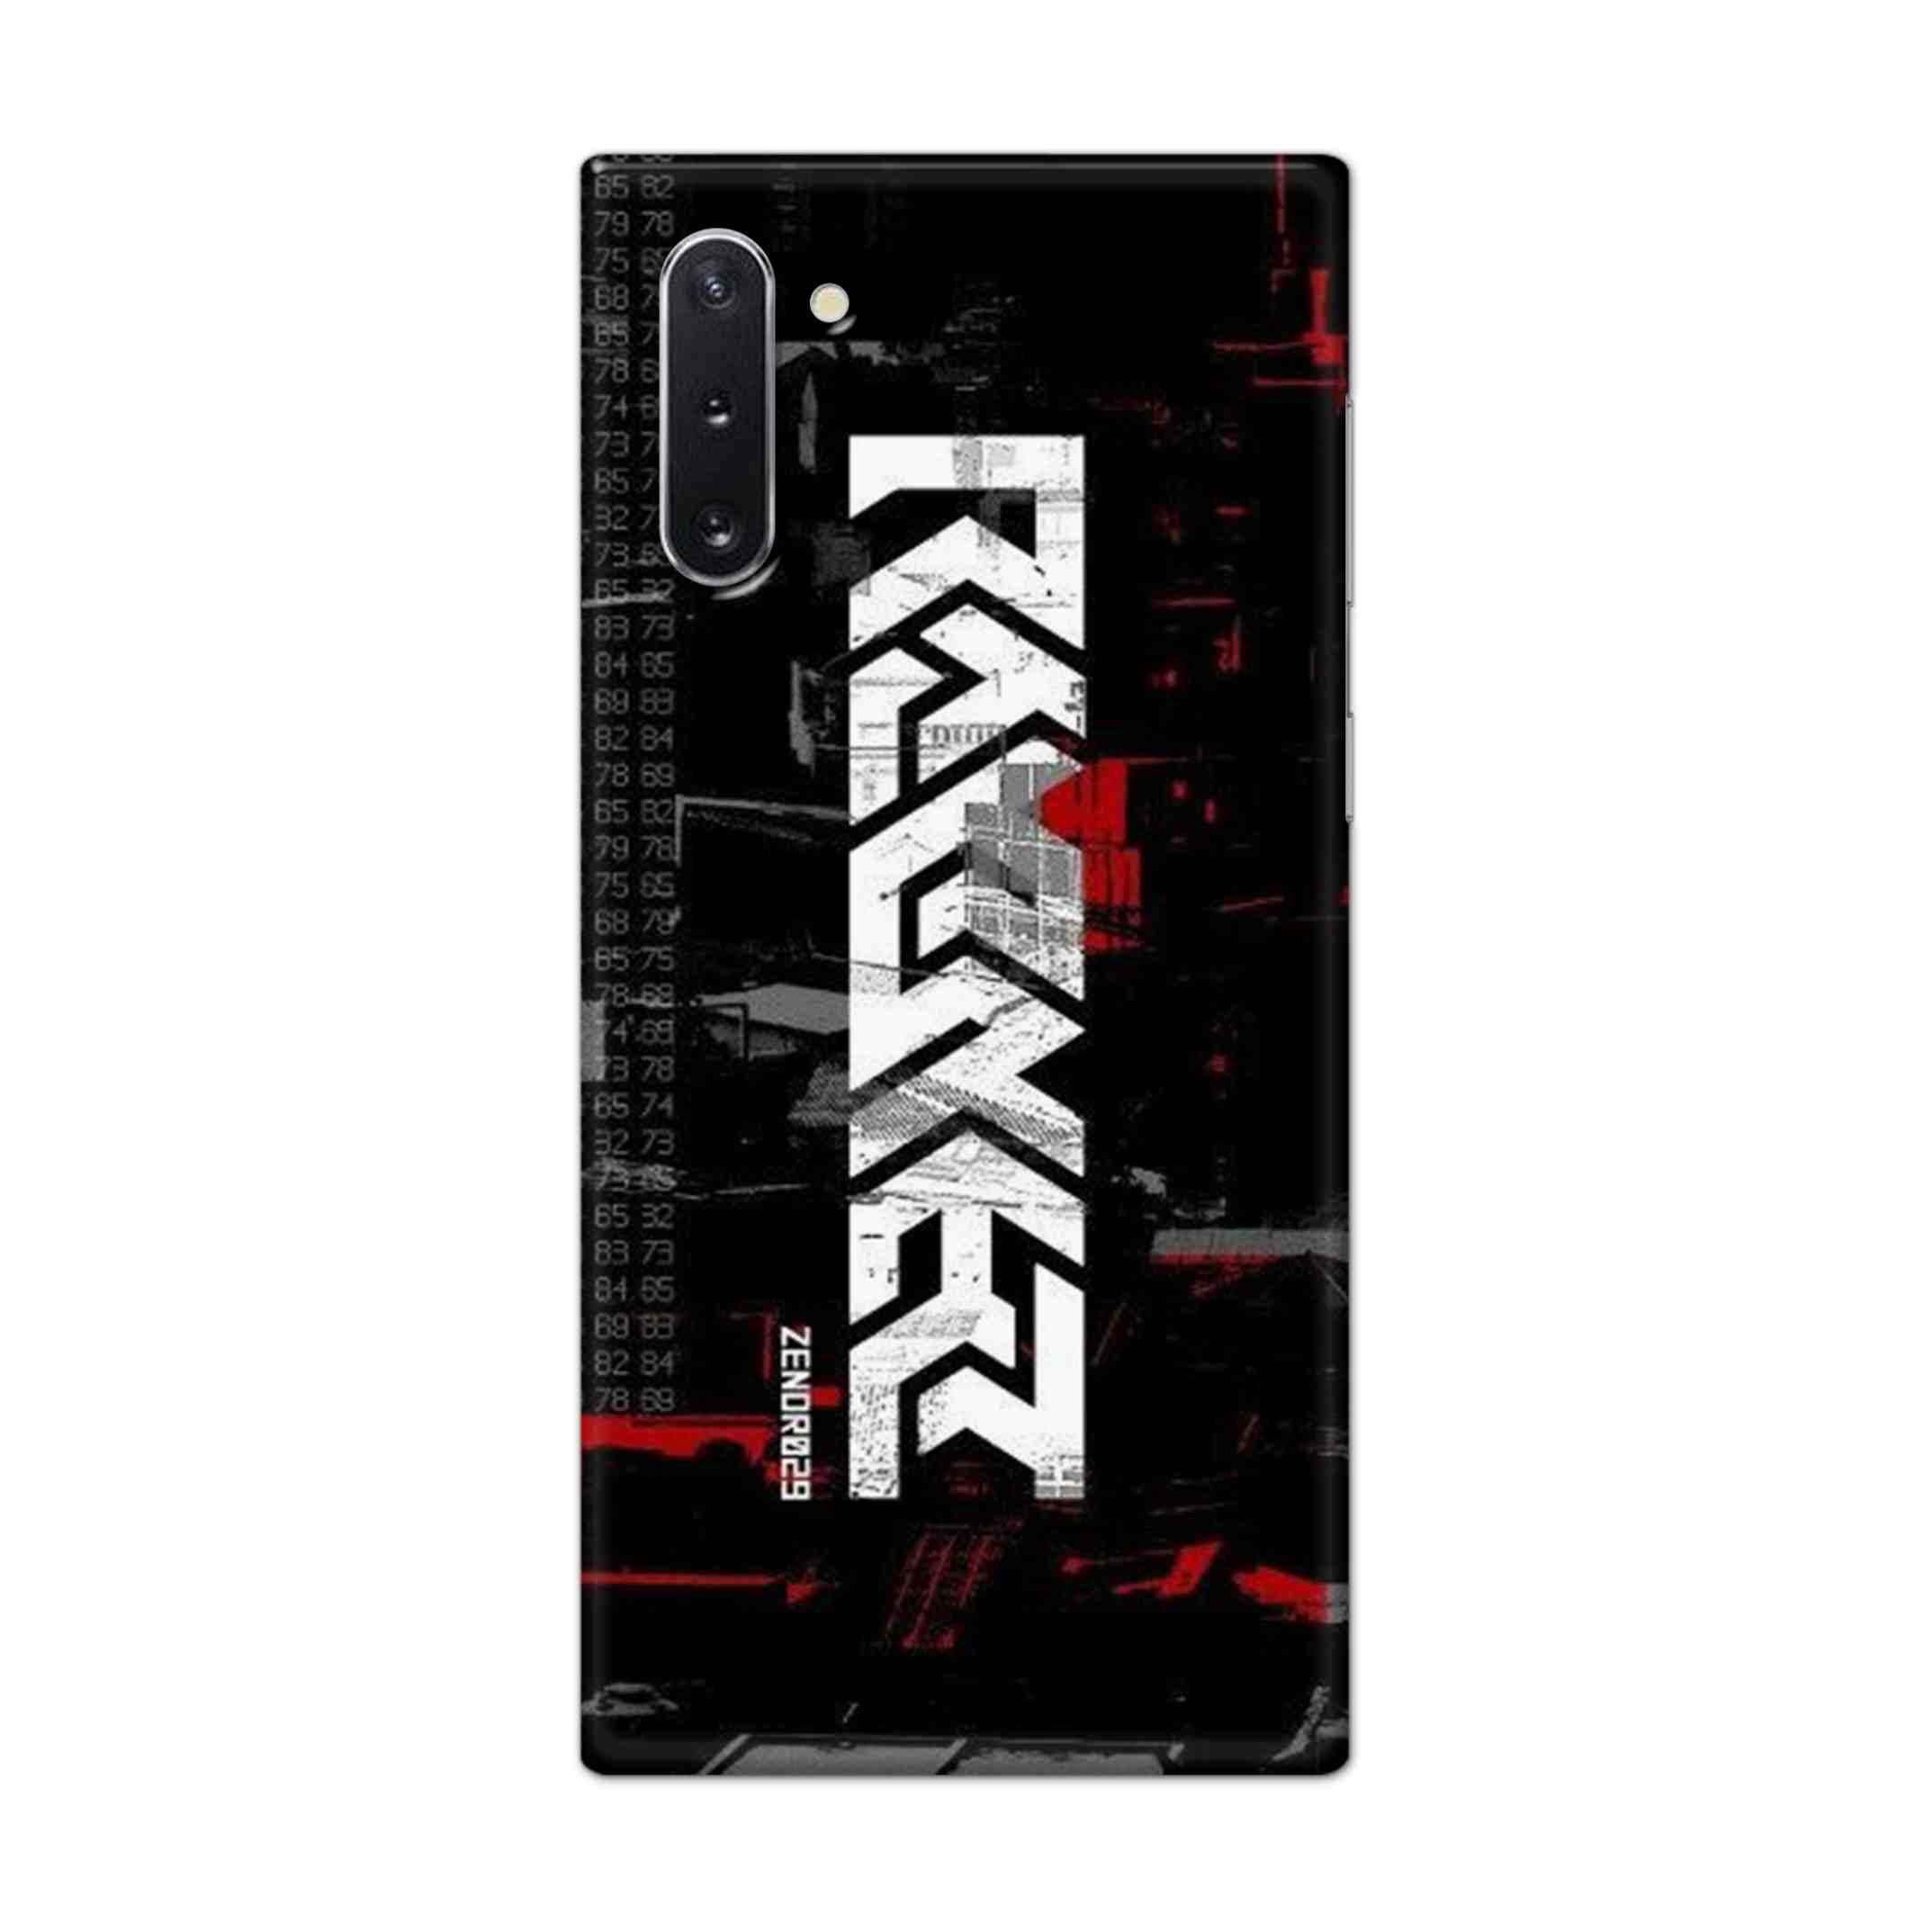 Buy Raxer Hard Back Mobile Phone Case Cover For Samsung Galaxy Note 10 Online